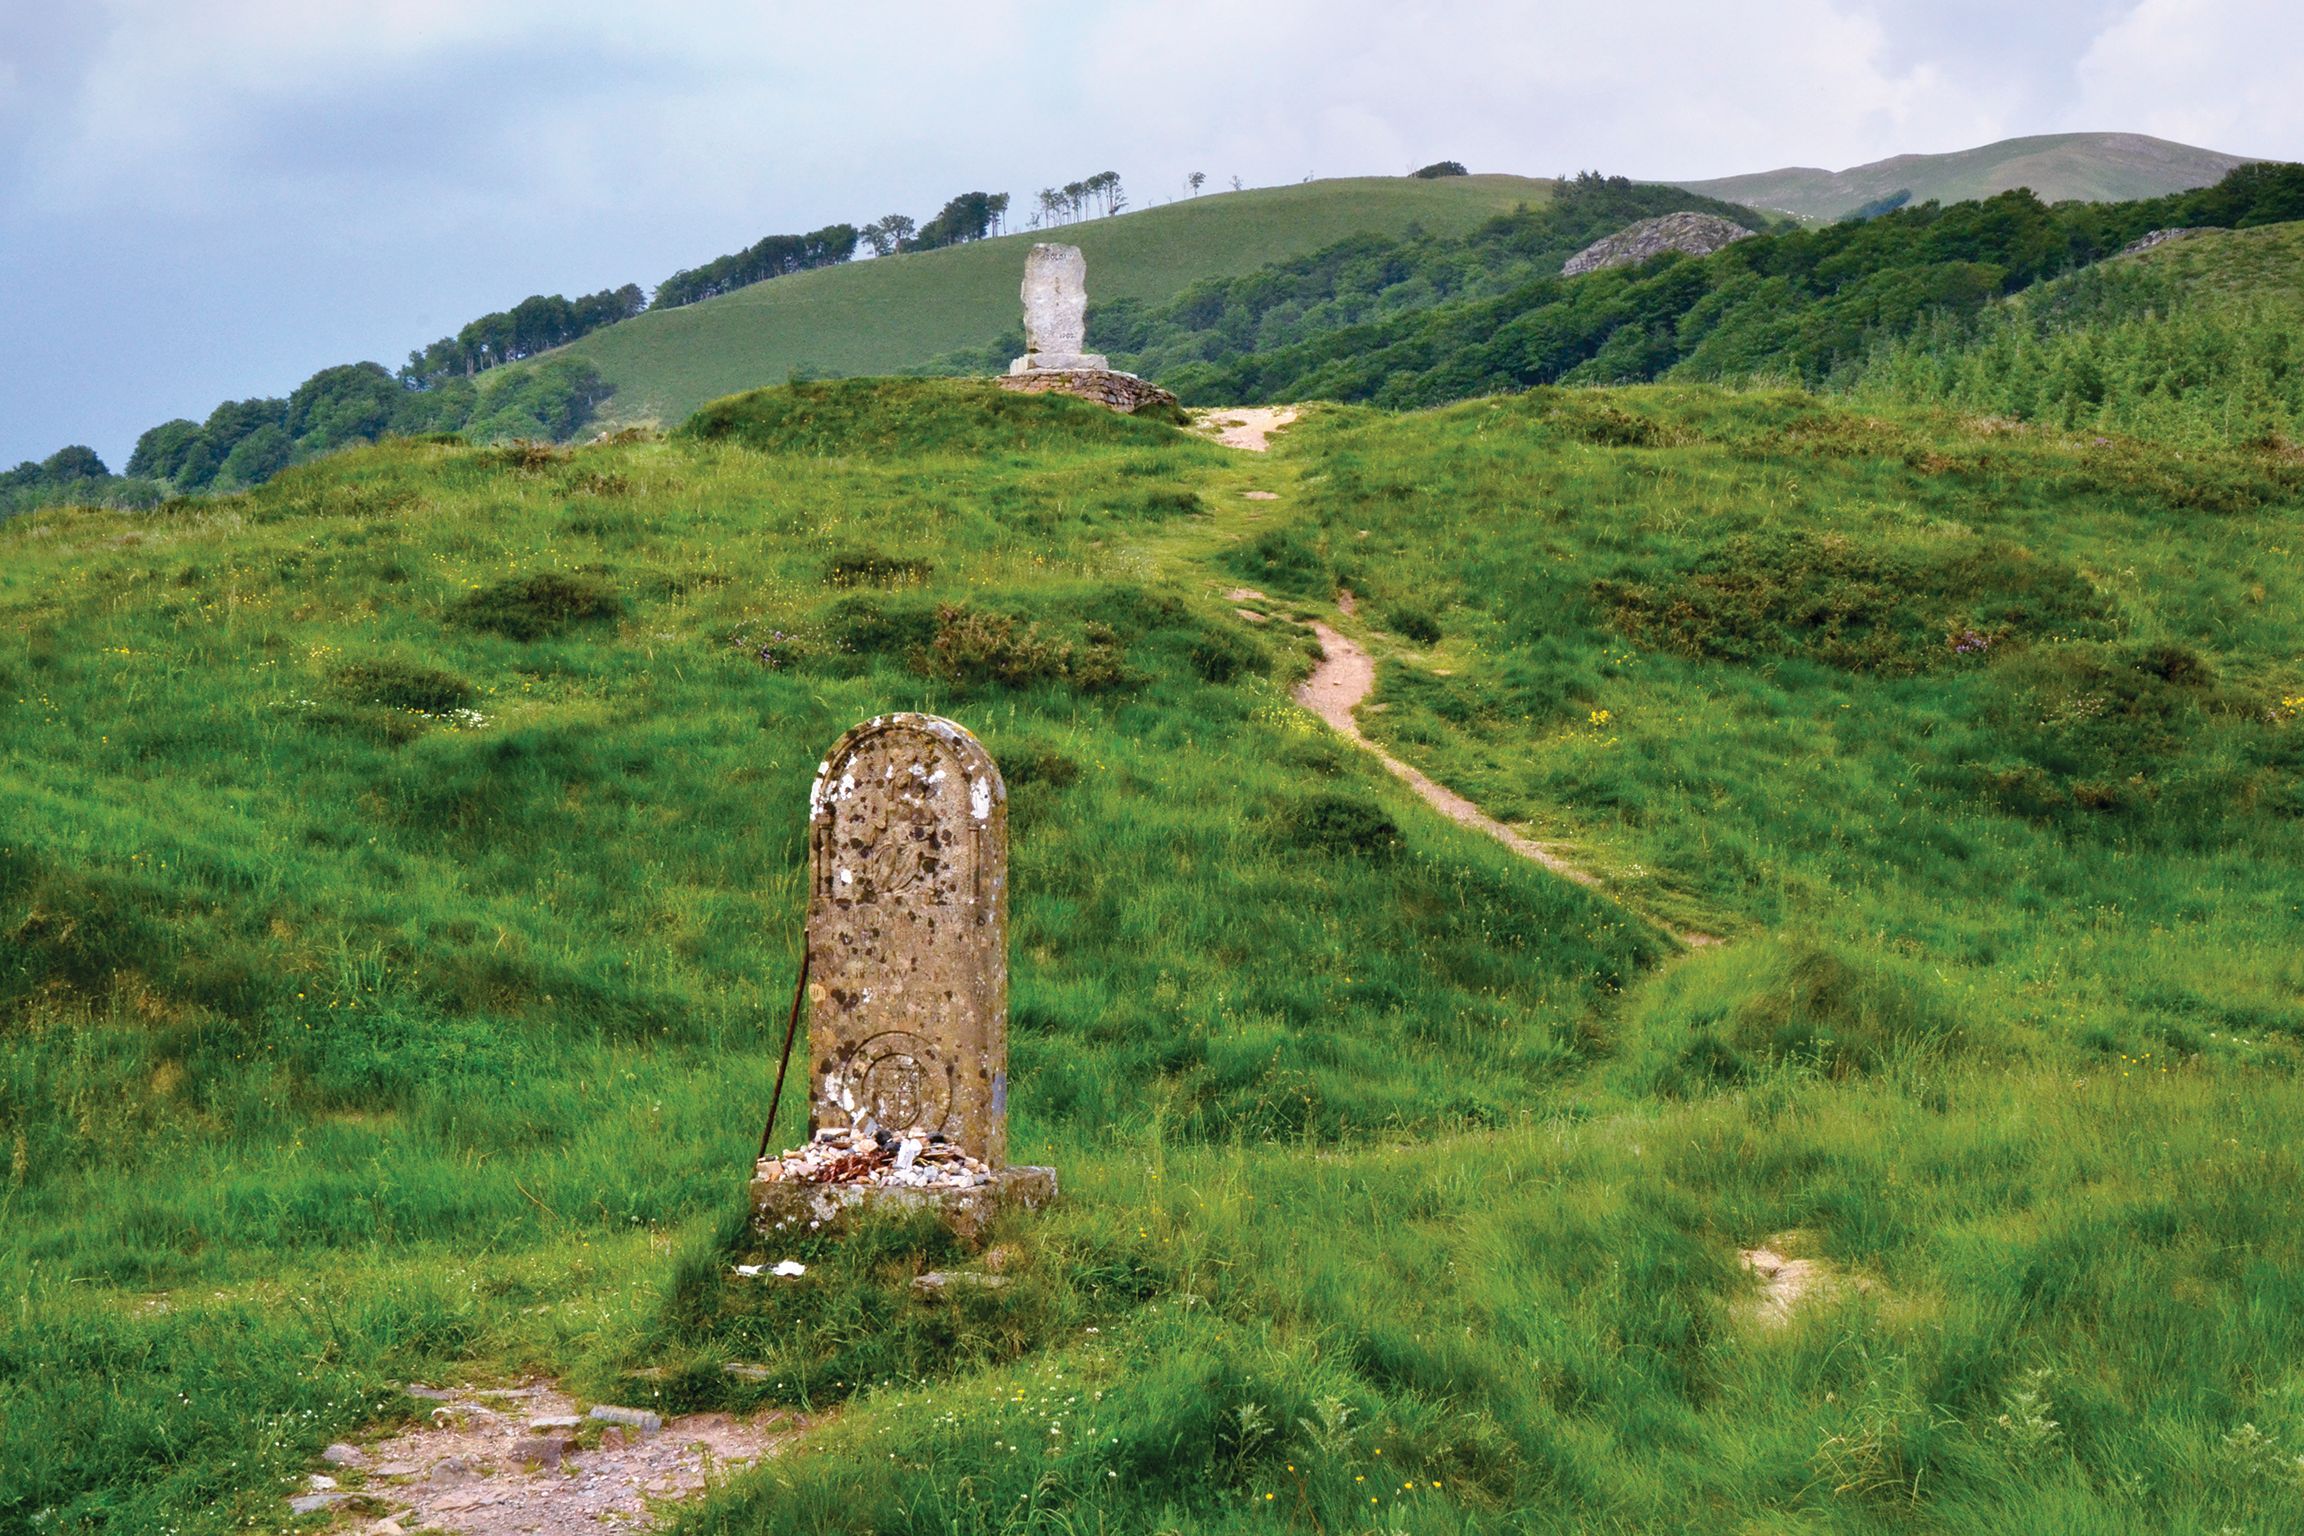 A marker commemorating Roland at the Battle of Roncevaux was erected at Roncesvalles Pass, or Roncevaux Pass, in 1967. At 3,468 feet, the pass is on the Spanish side of the border and has historically been an important route between France and Spain through the Pyrenees. 